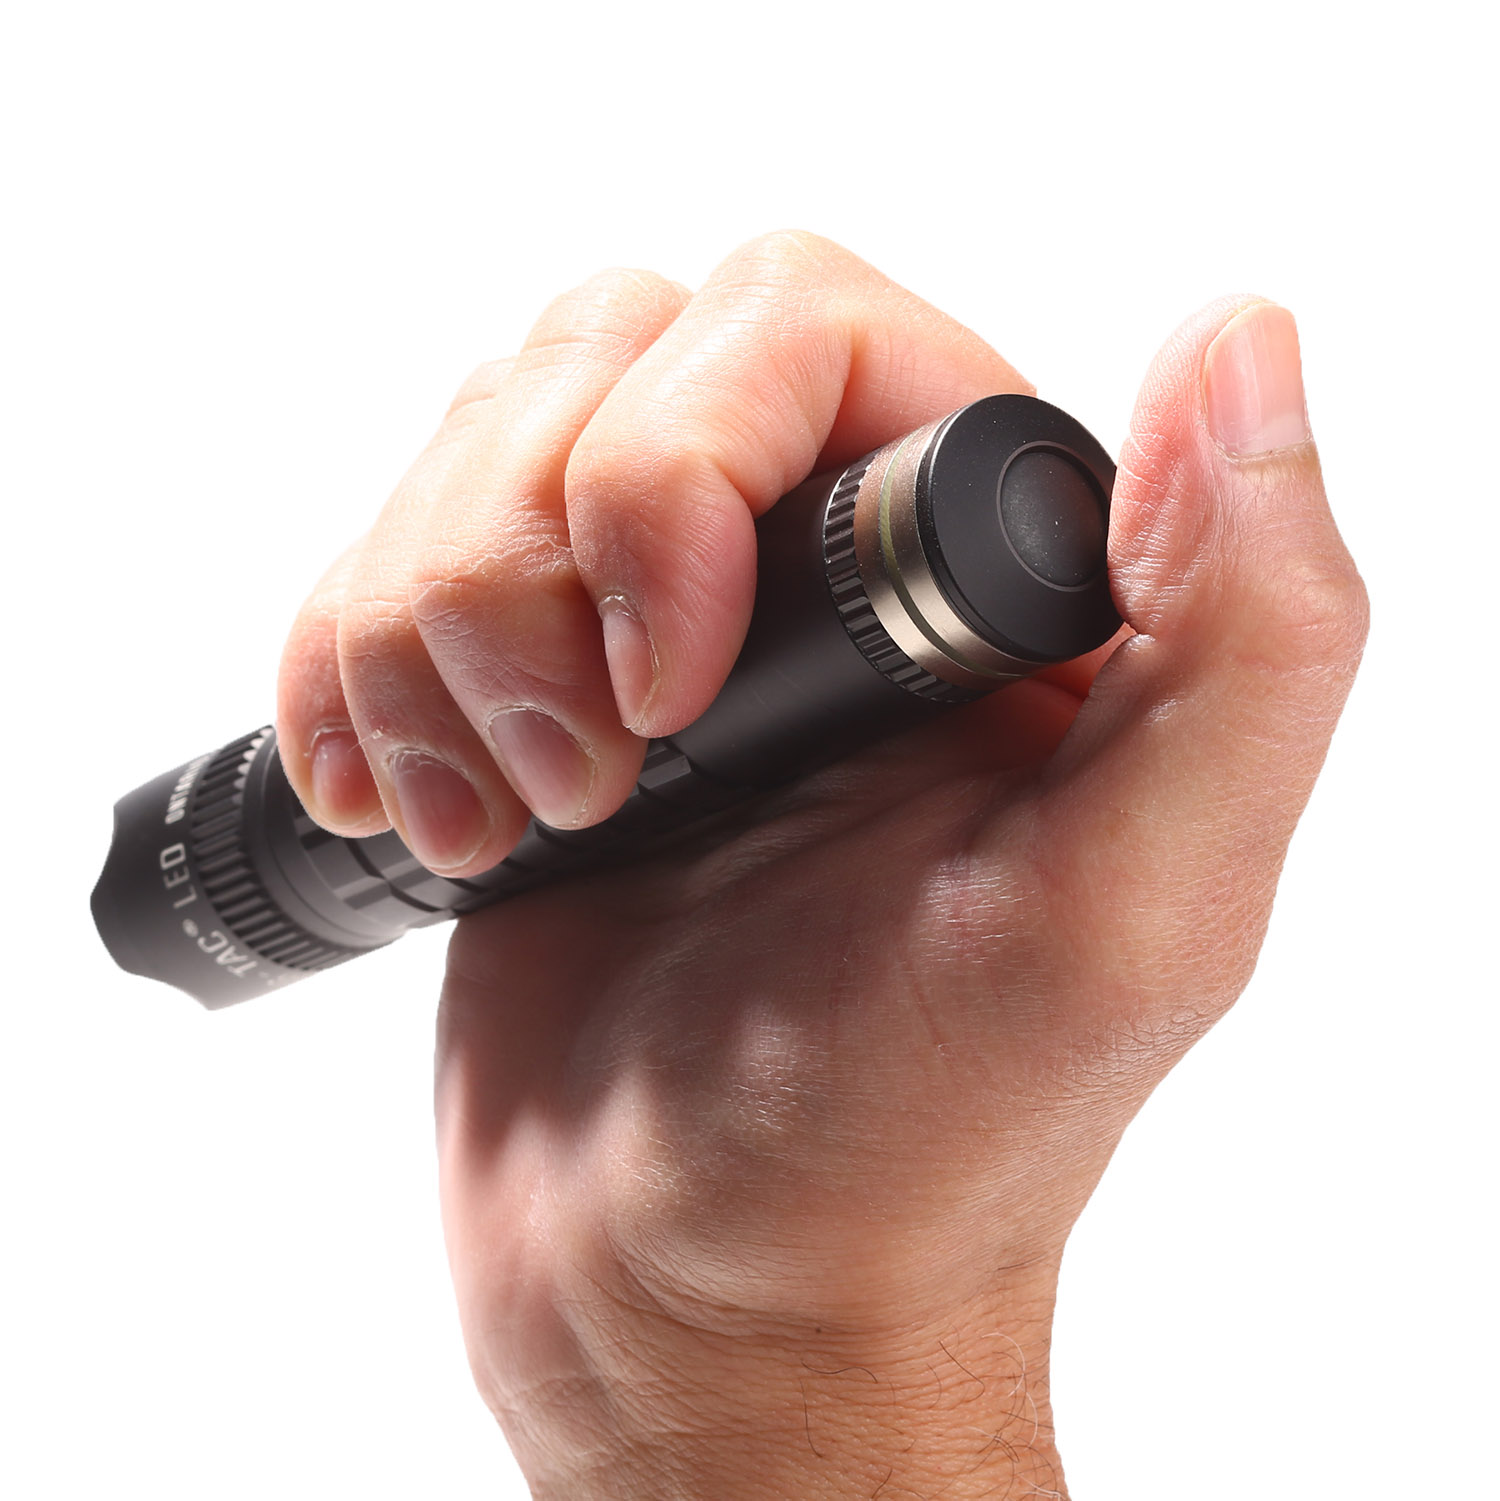 MagLite MagTac LED Rechargeable Flashlight with Crowned Beze